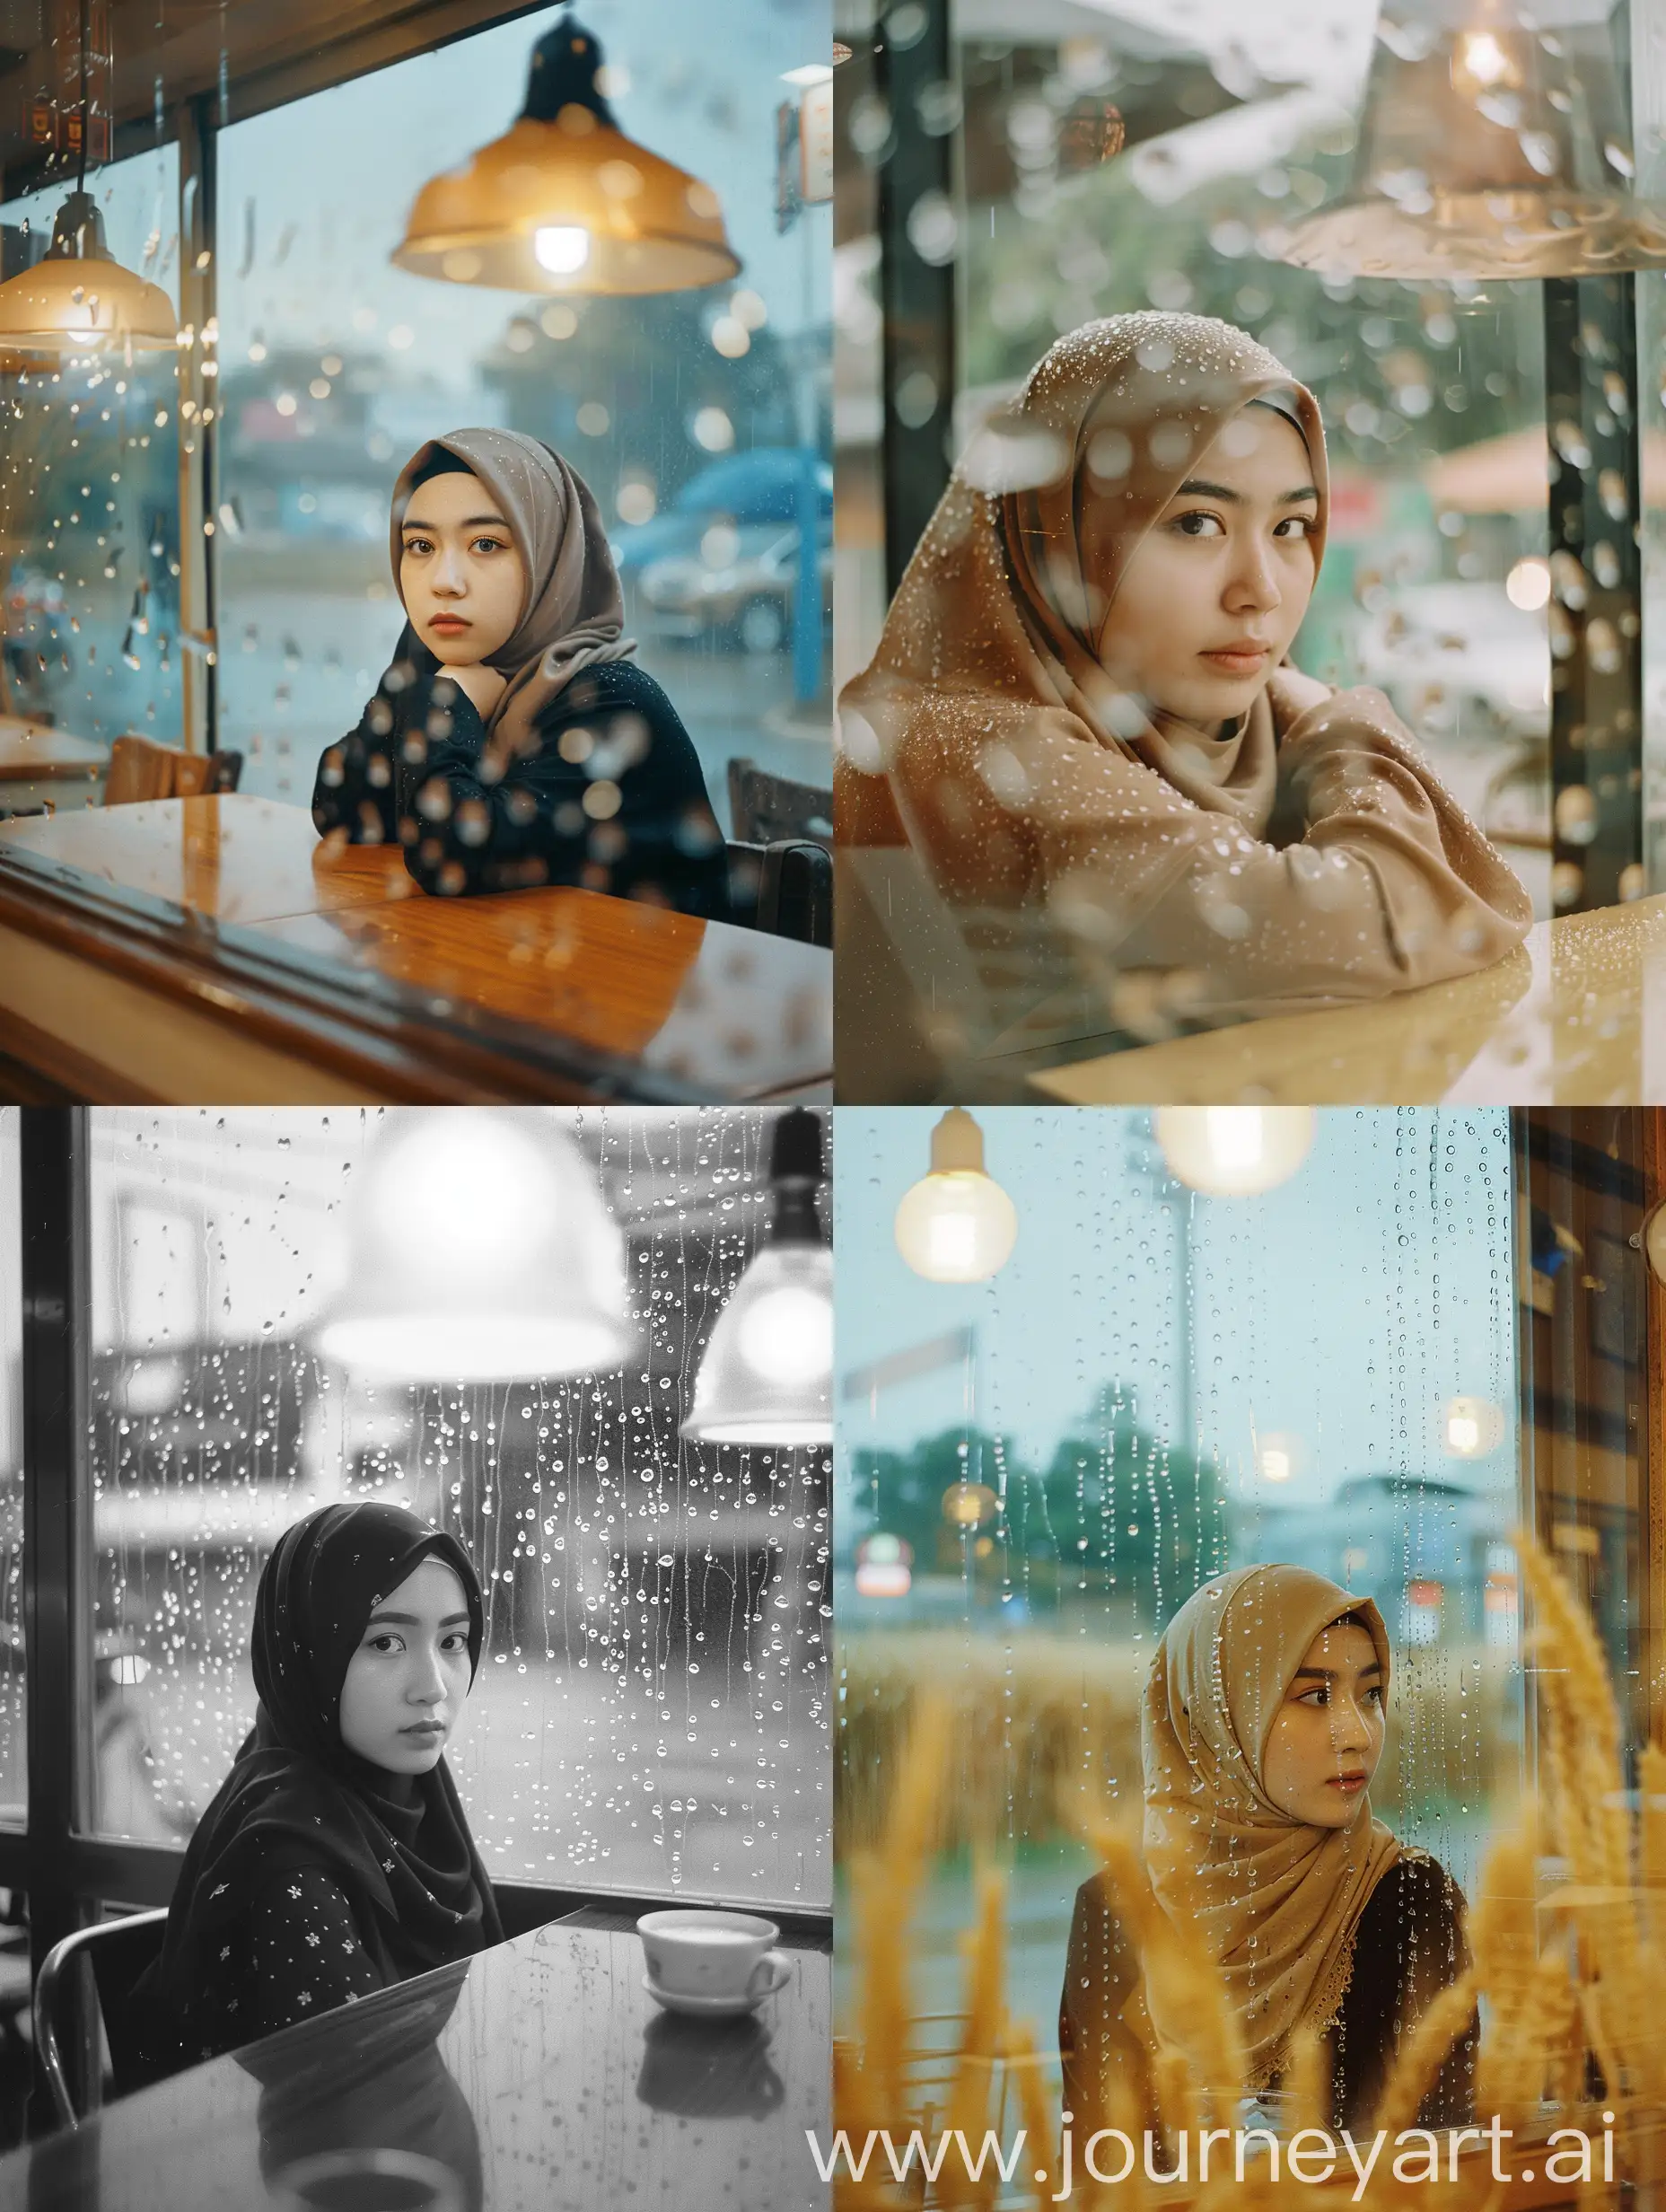 Asian-Woman-Contemplating-in-Hijab-Inside-Rainy-Cafe-with-Nostalgic-Atmosphere